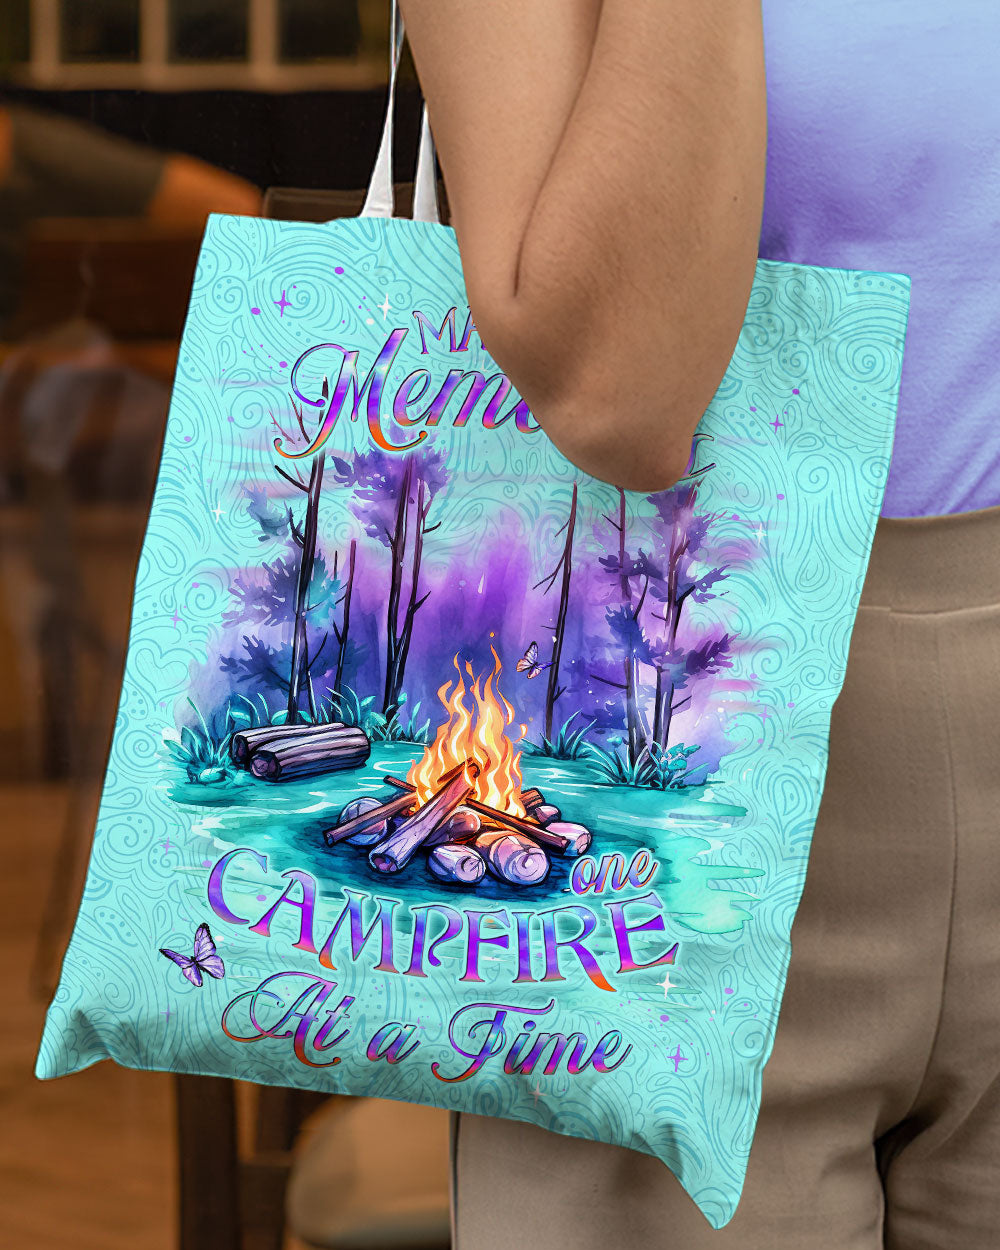 MAKING MEMORIES ONE CAMPFIRE AT A TIME TOTE BAG - YHDU0804242